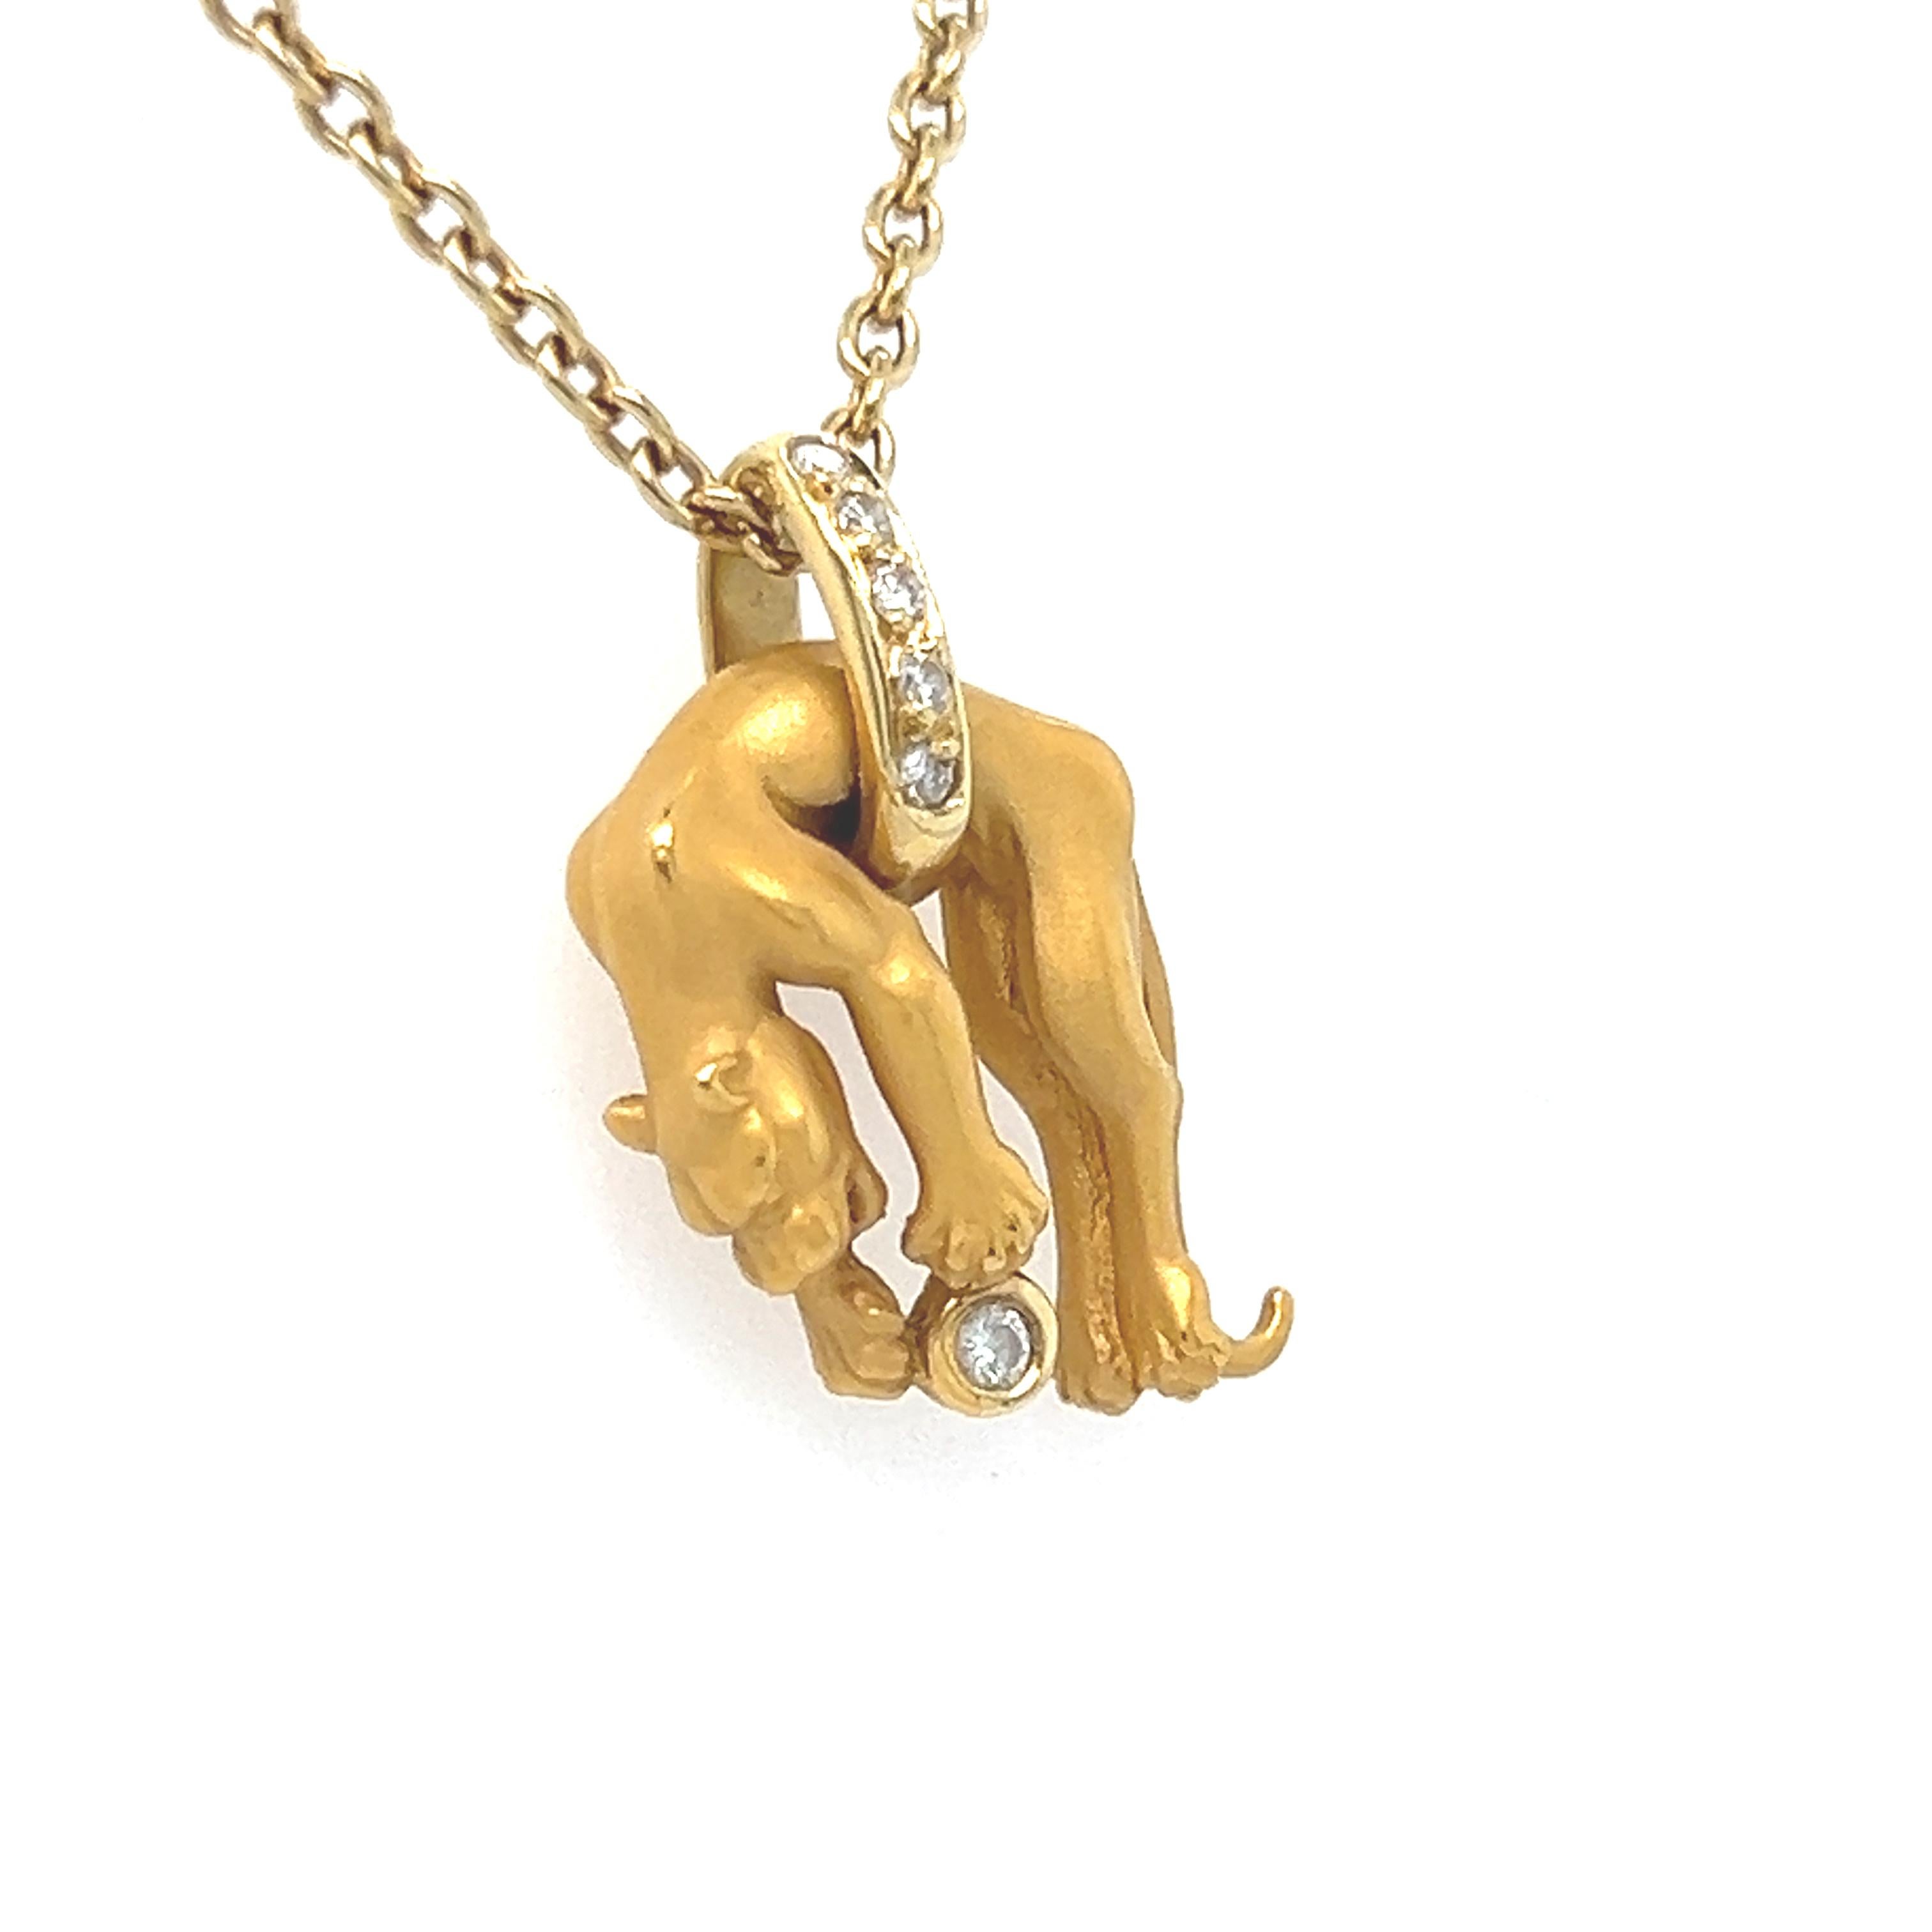 This Vintage 18K Yellow Gold Carrera y Carrera Panther Pendant with Diamonds is such a rare find, and such a statement piece! Dating to 1997, this fantastic necklace comes with everything original, including the box and authenticity card. It is also